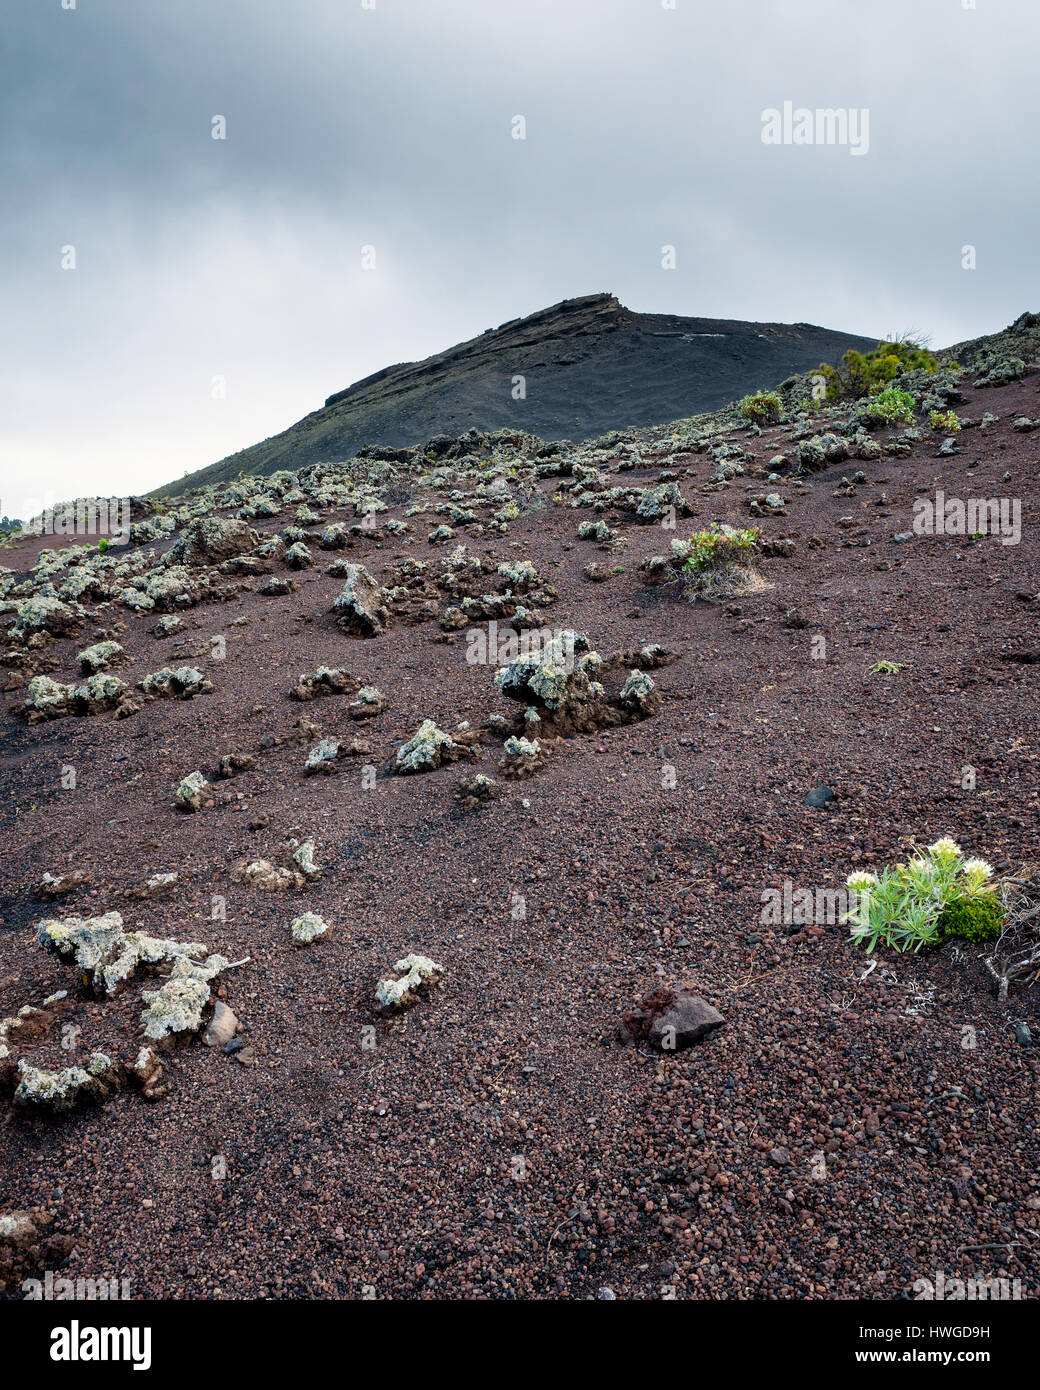 Volcan de San Antonio located in the Cumbre Vieja region in Fuencaliente, La Palma.   Only a small amount of vegetation grows here.  Clumps of lava rock scatter the landscape.  The San Antonio volcano towers high in the background. Stock Photo